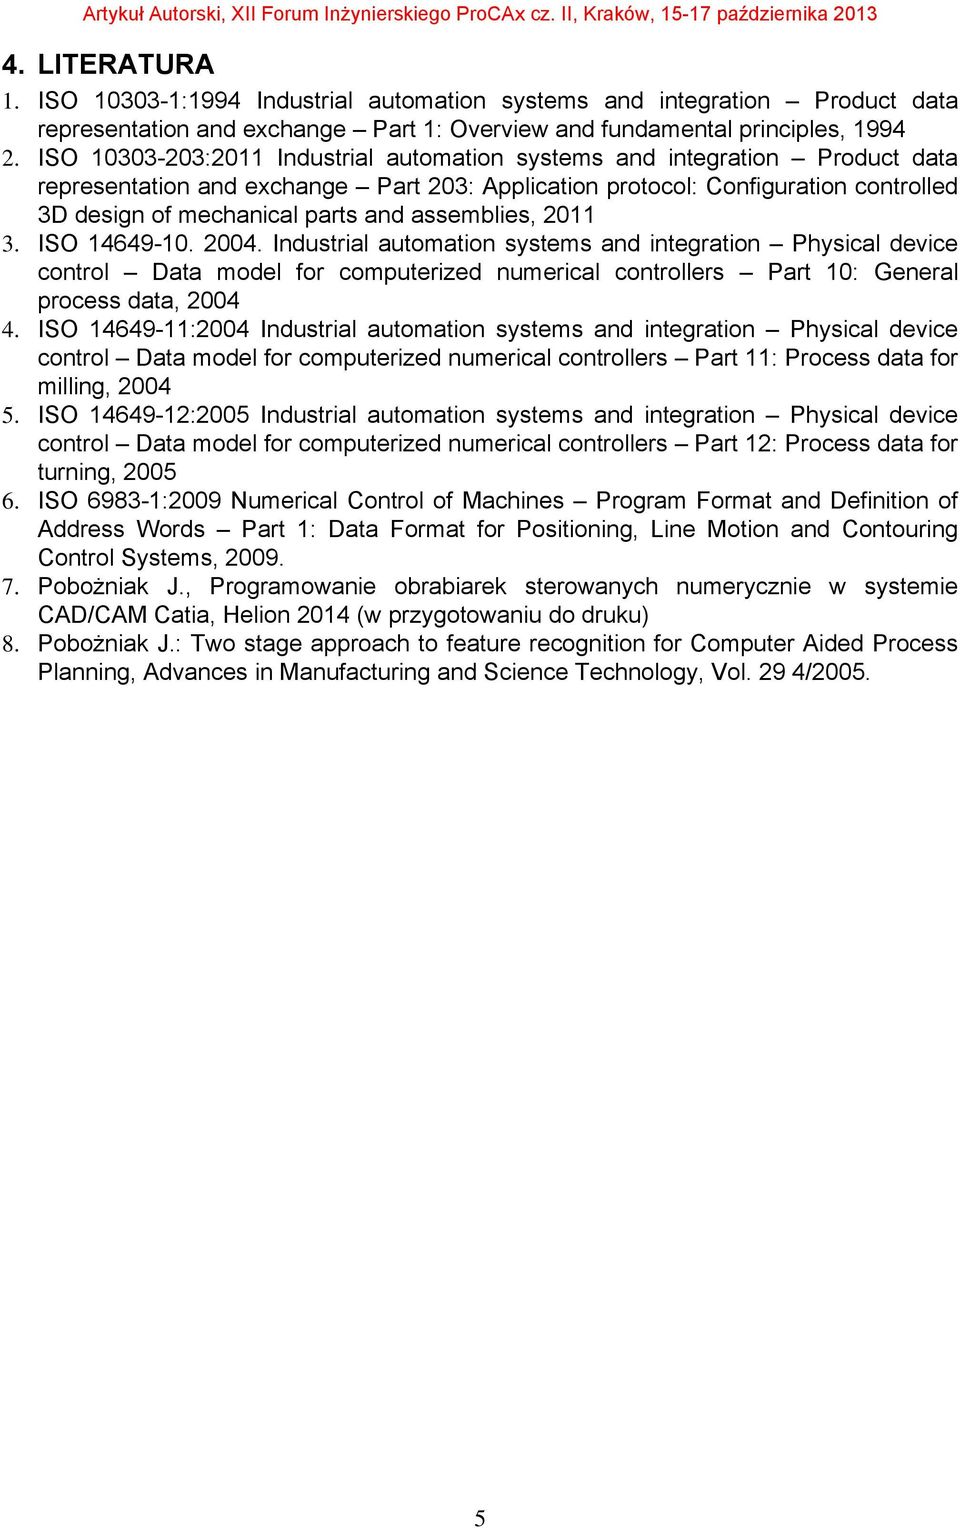 assemblies, 2011 3. ISO 14649-10. 2004. Industrial automation systems and integration Physical device control Data model for computerized numerical controllers Part 10: General process data, 2004 4.